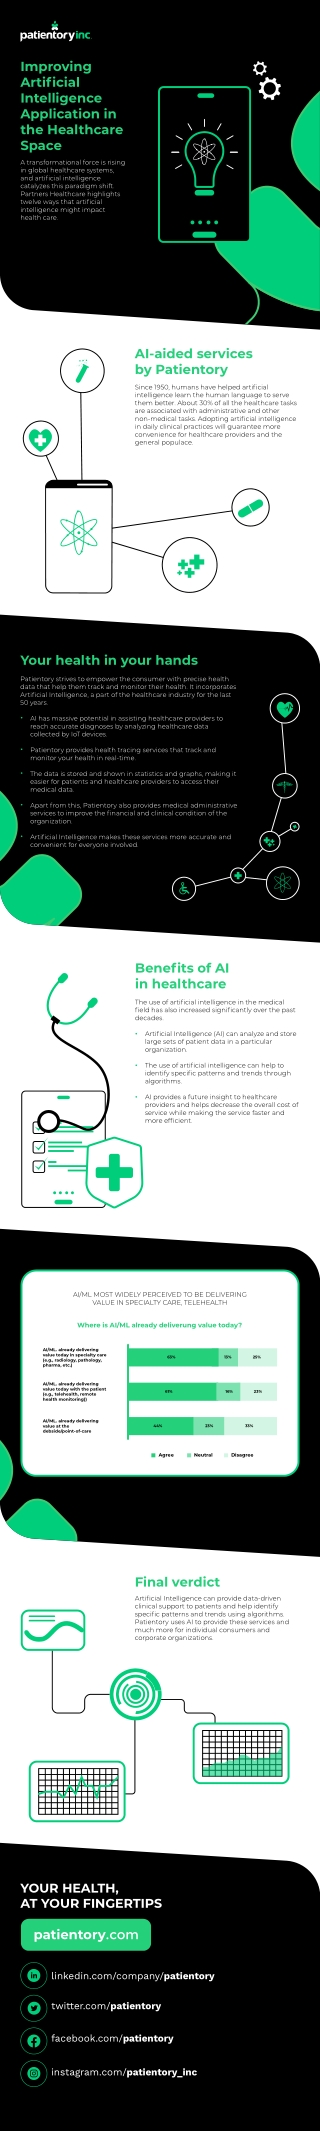 Artificial Intelligence in the HealthCare Space